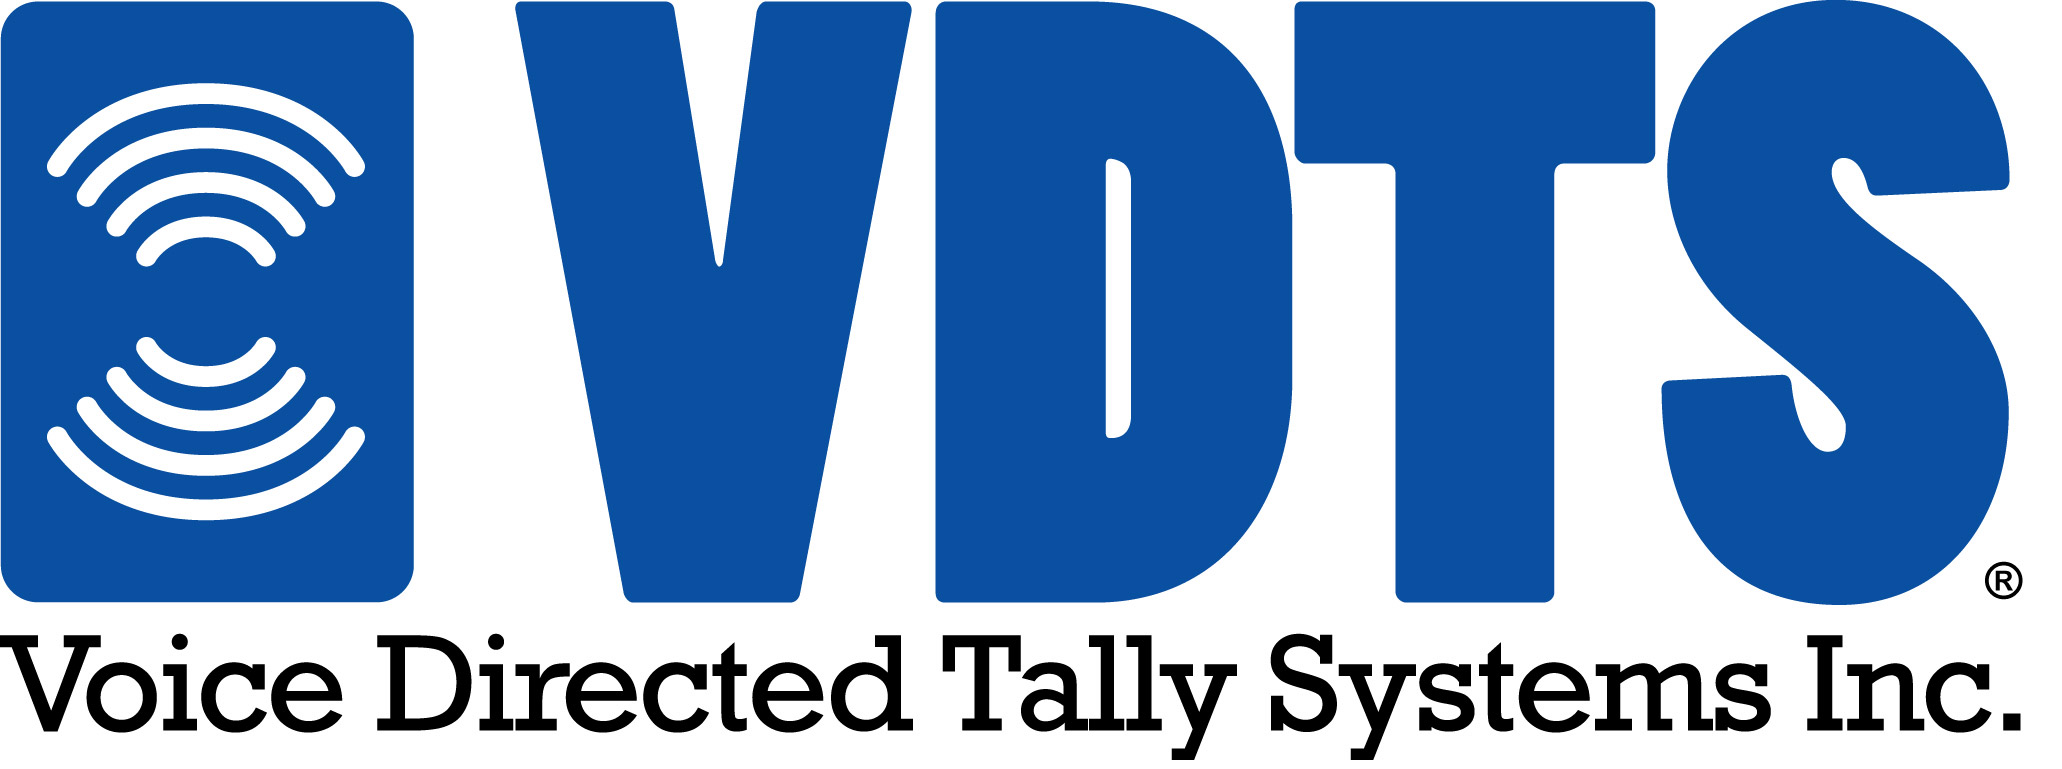 Voice Directed Tally Systems, Inc.  